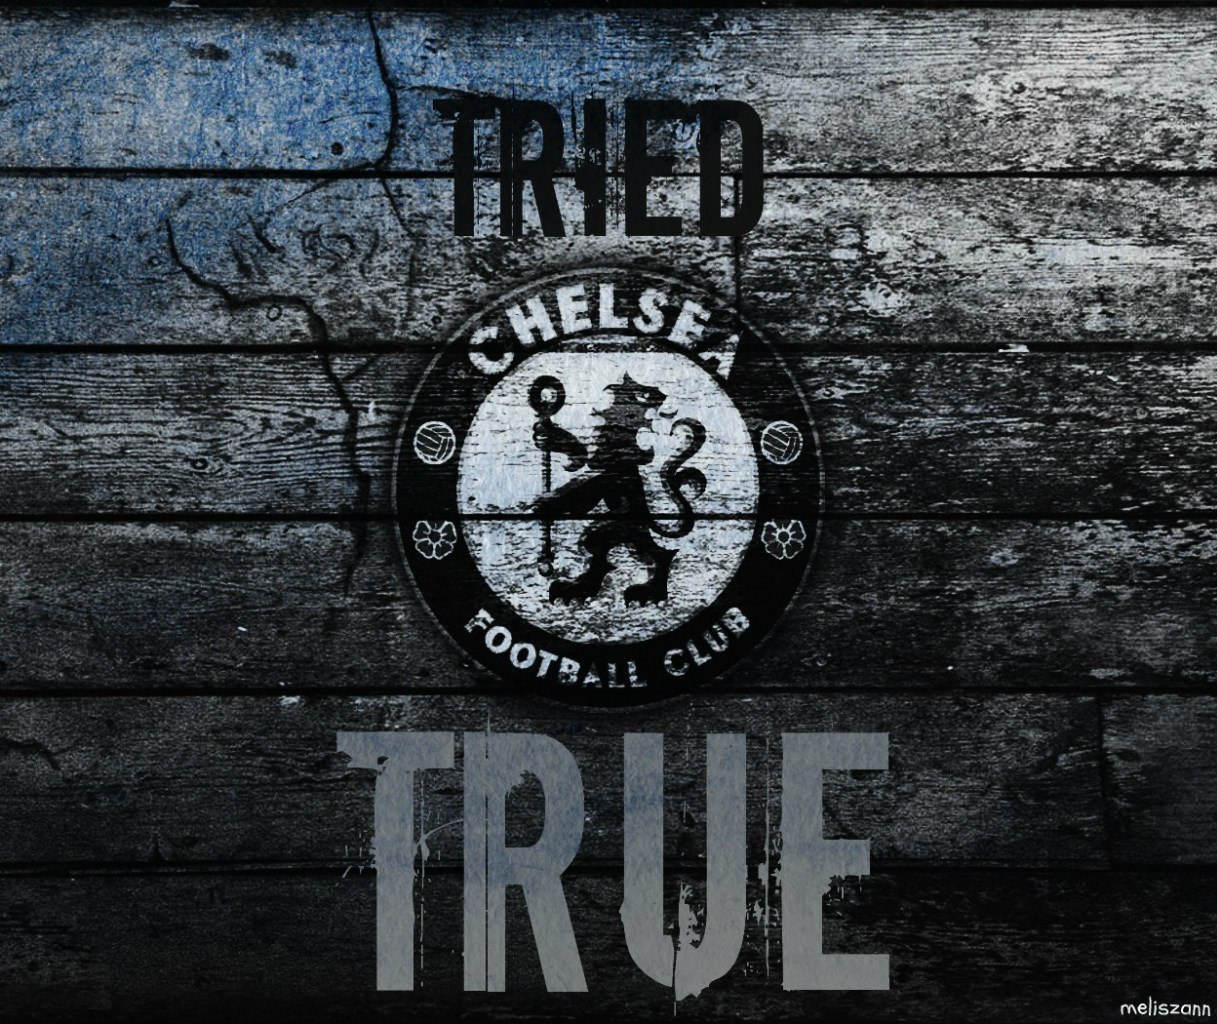 Mobile wallpaper: Chelsea, Sports, Football, Logos, 20457 download the  picture for free.